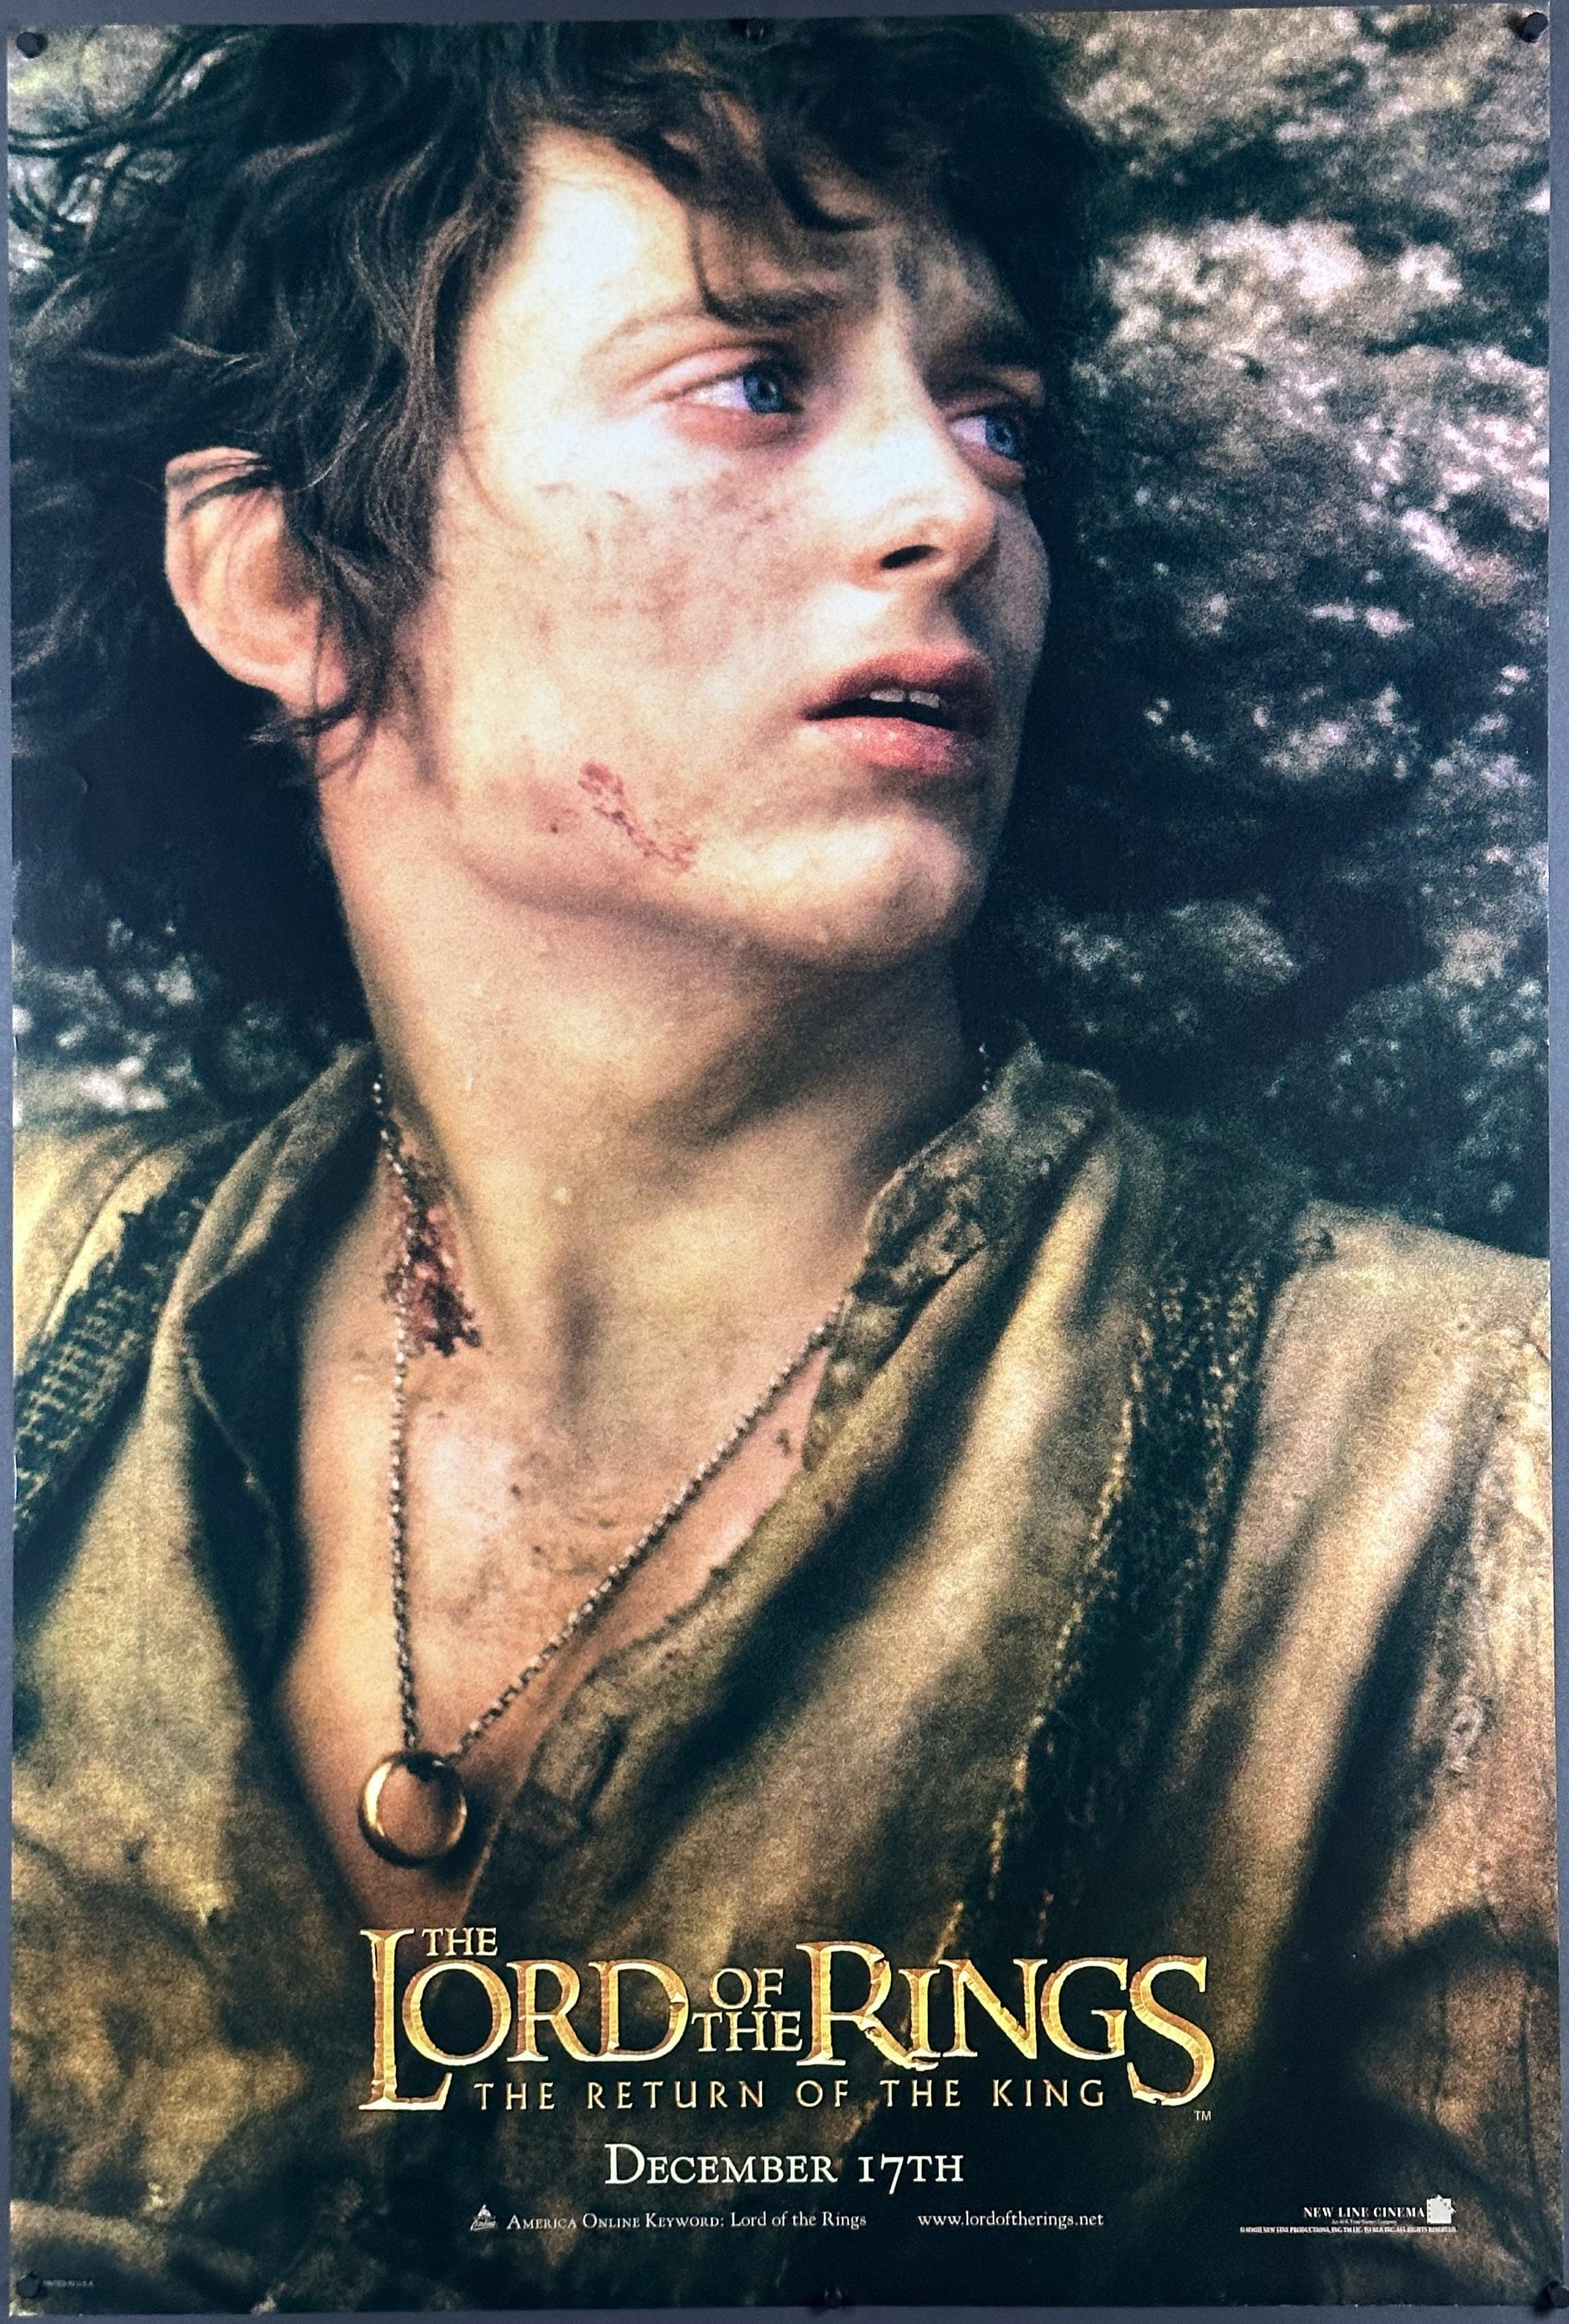 The Lord Of The Rings: The Return Of The King US One Sheet Frodo Style (2003) - ORIGINAL RELEASE - posterpalace.com